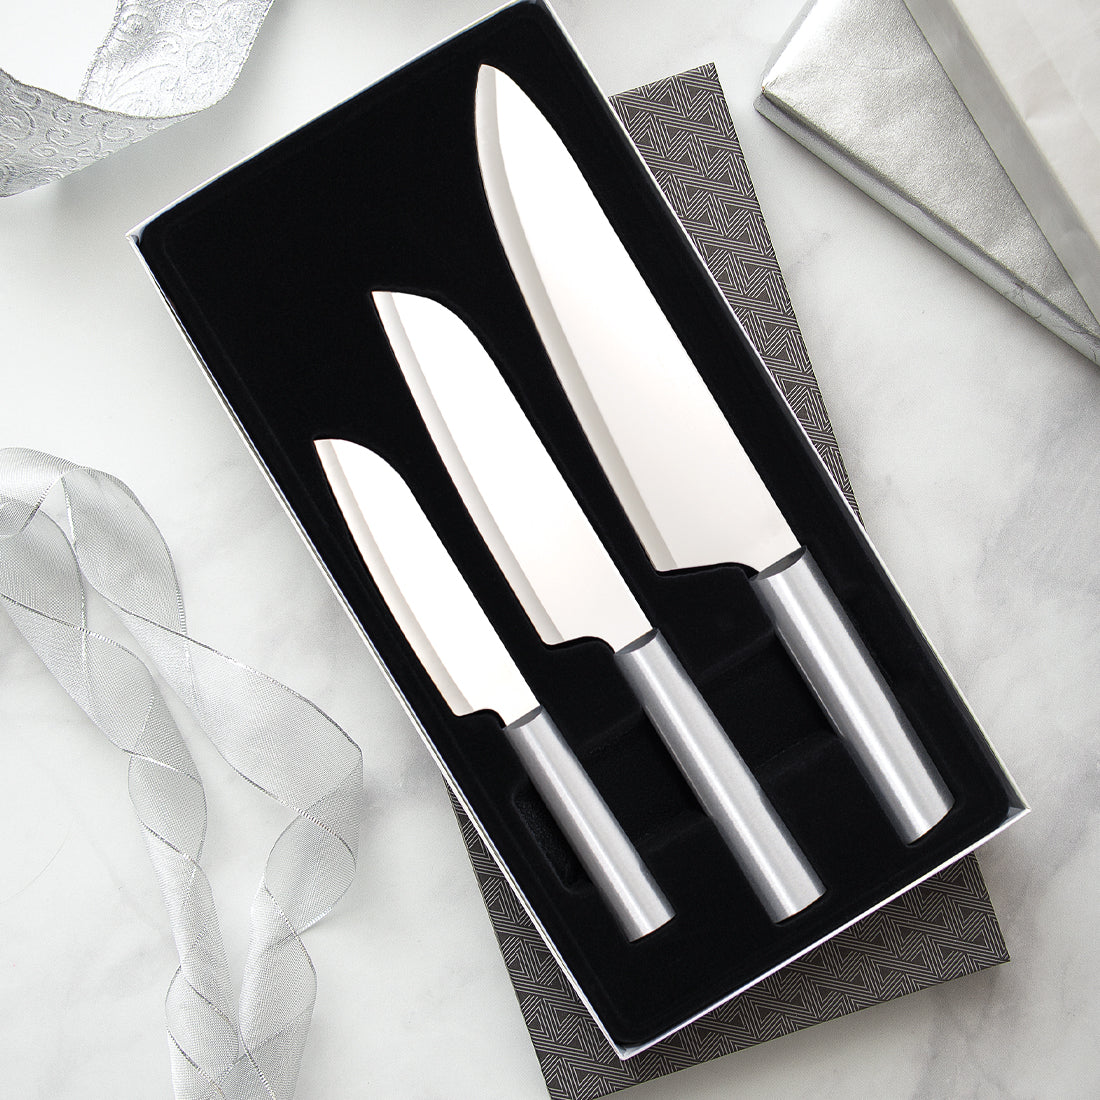 A Chef Select Gift Set on a marble countertop. Create excitement in the kitchen!